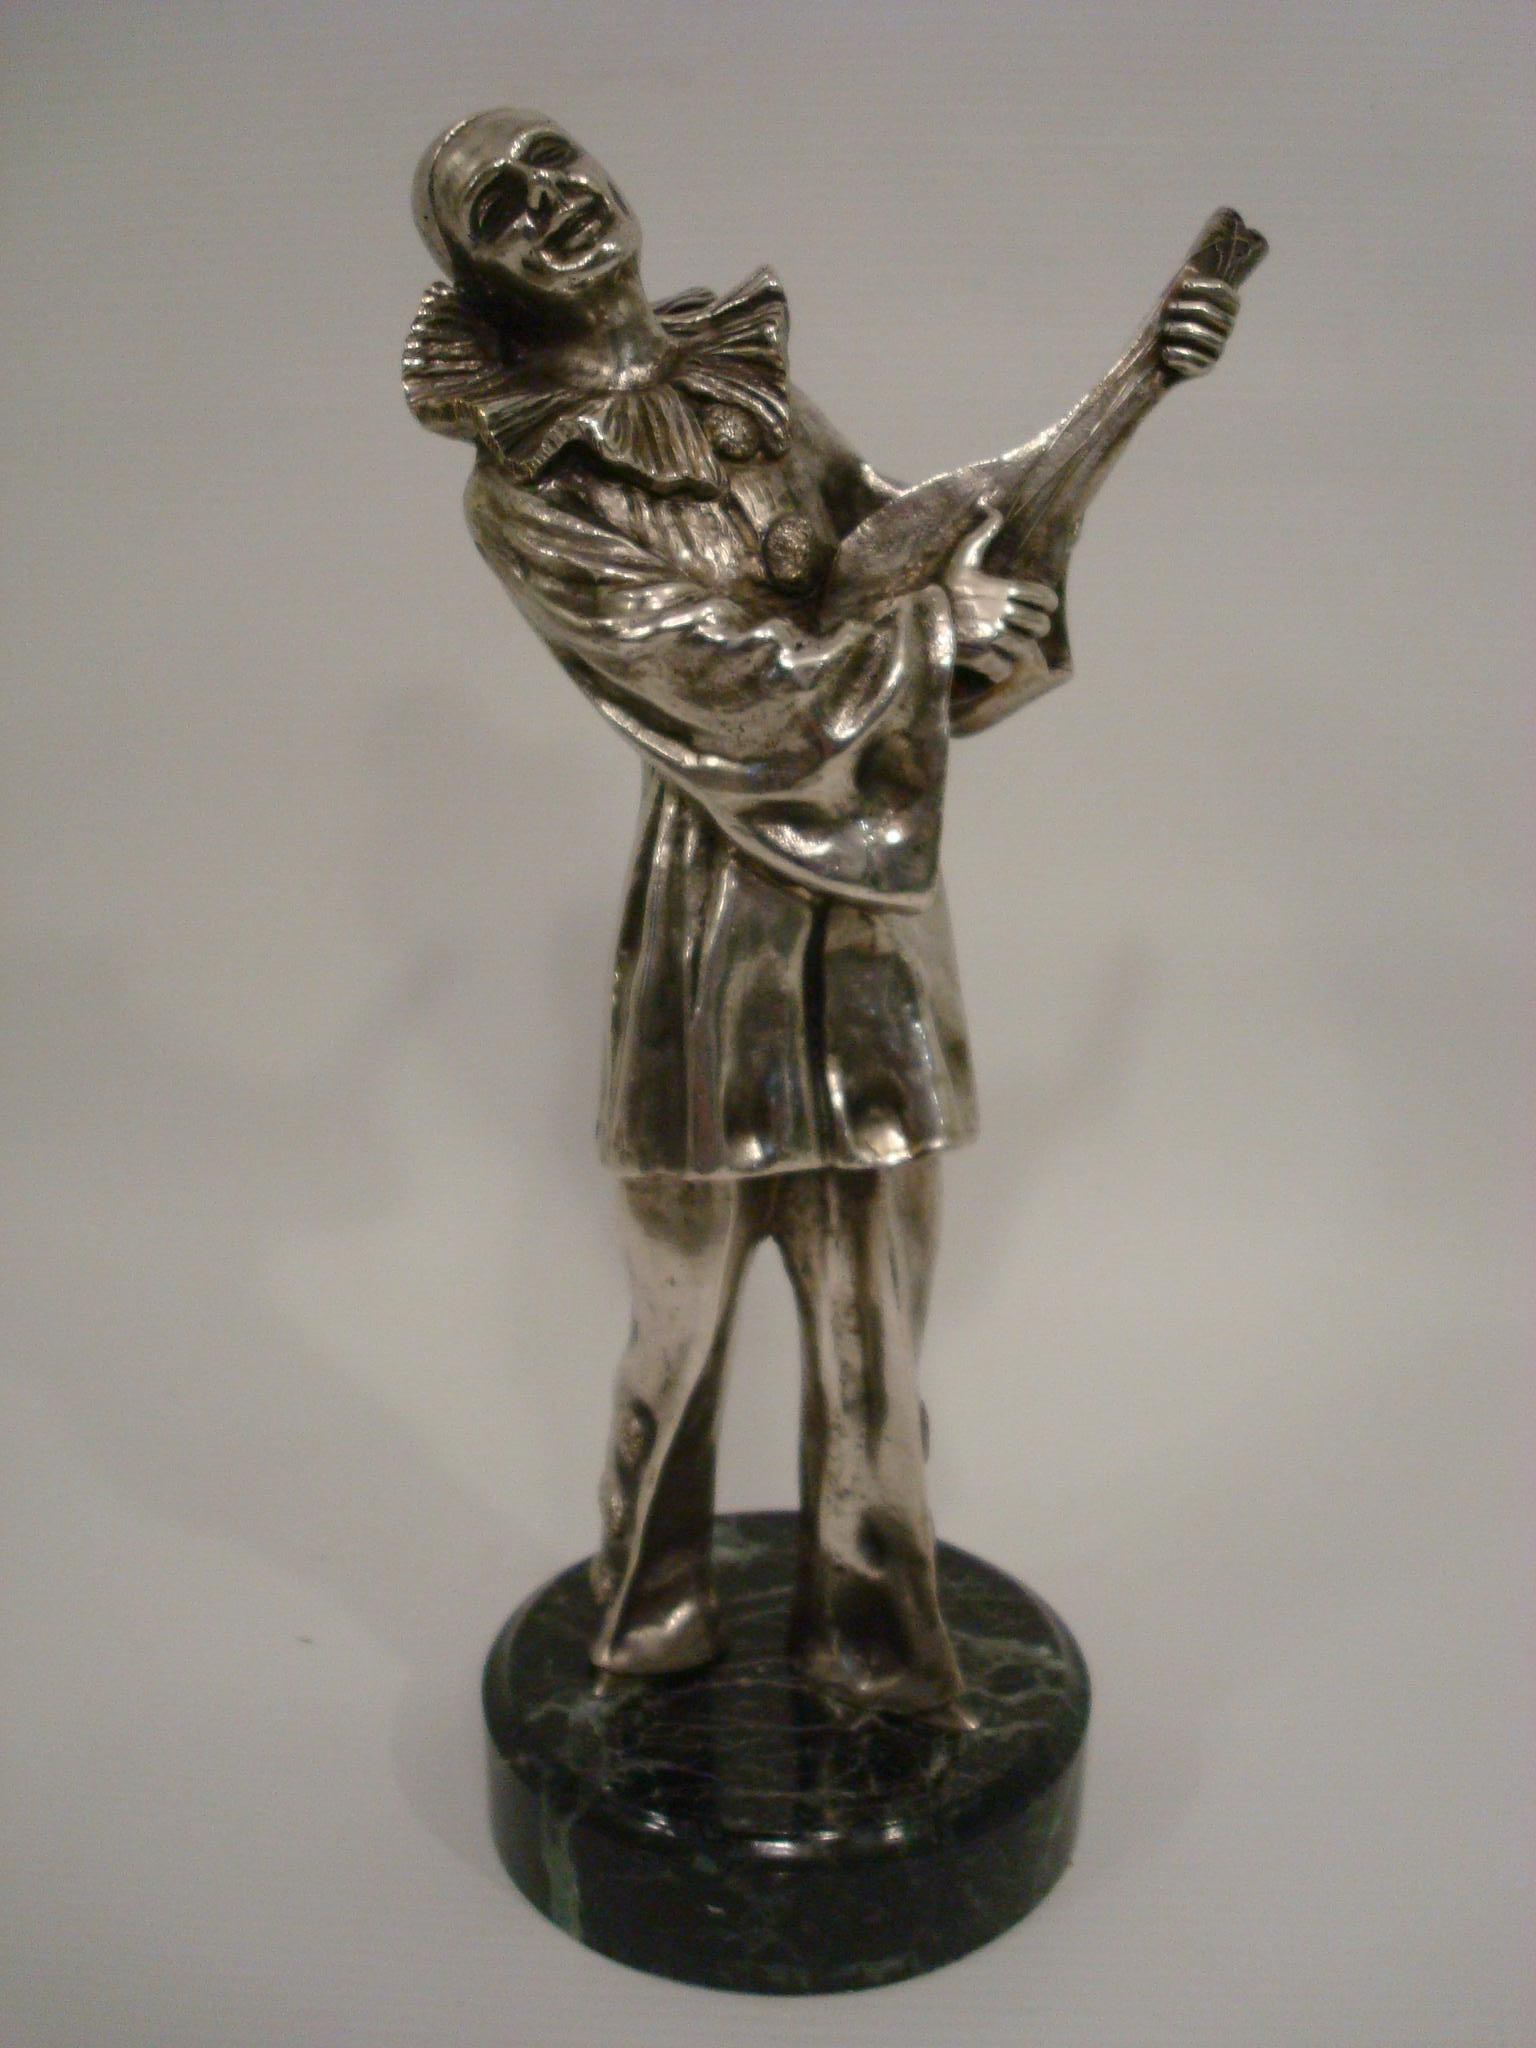 Art Deco Pierrot Silvered Bronze Sculpture, Signed Alonzo, France 1920´s
Bronze mounted over a marble base.